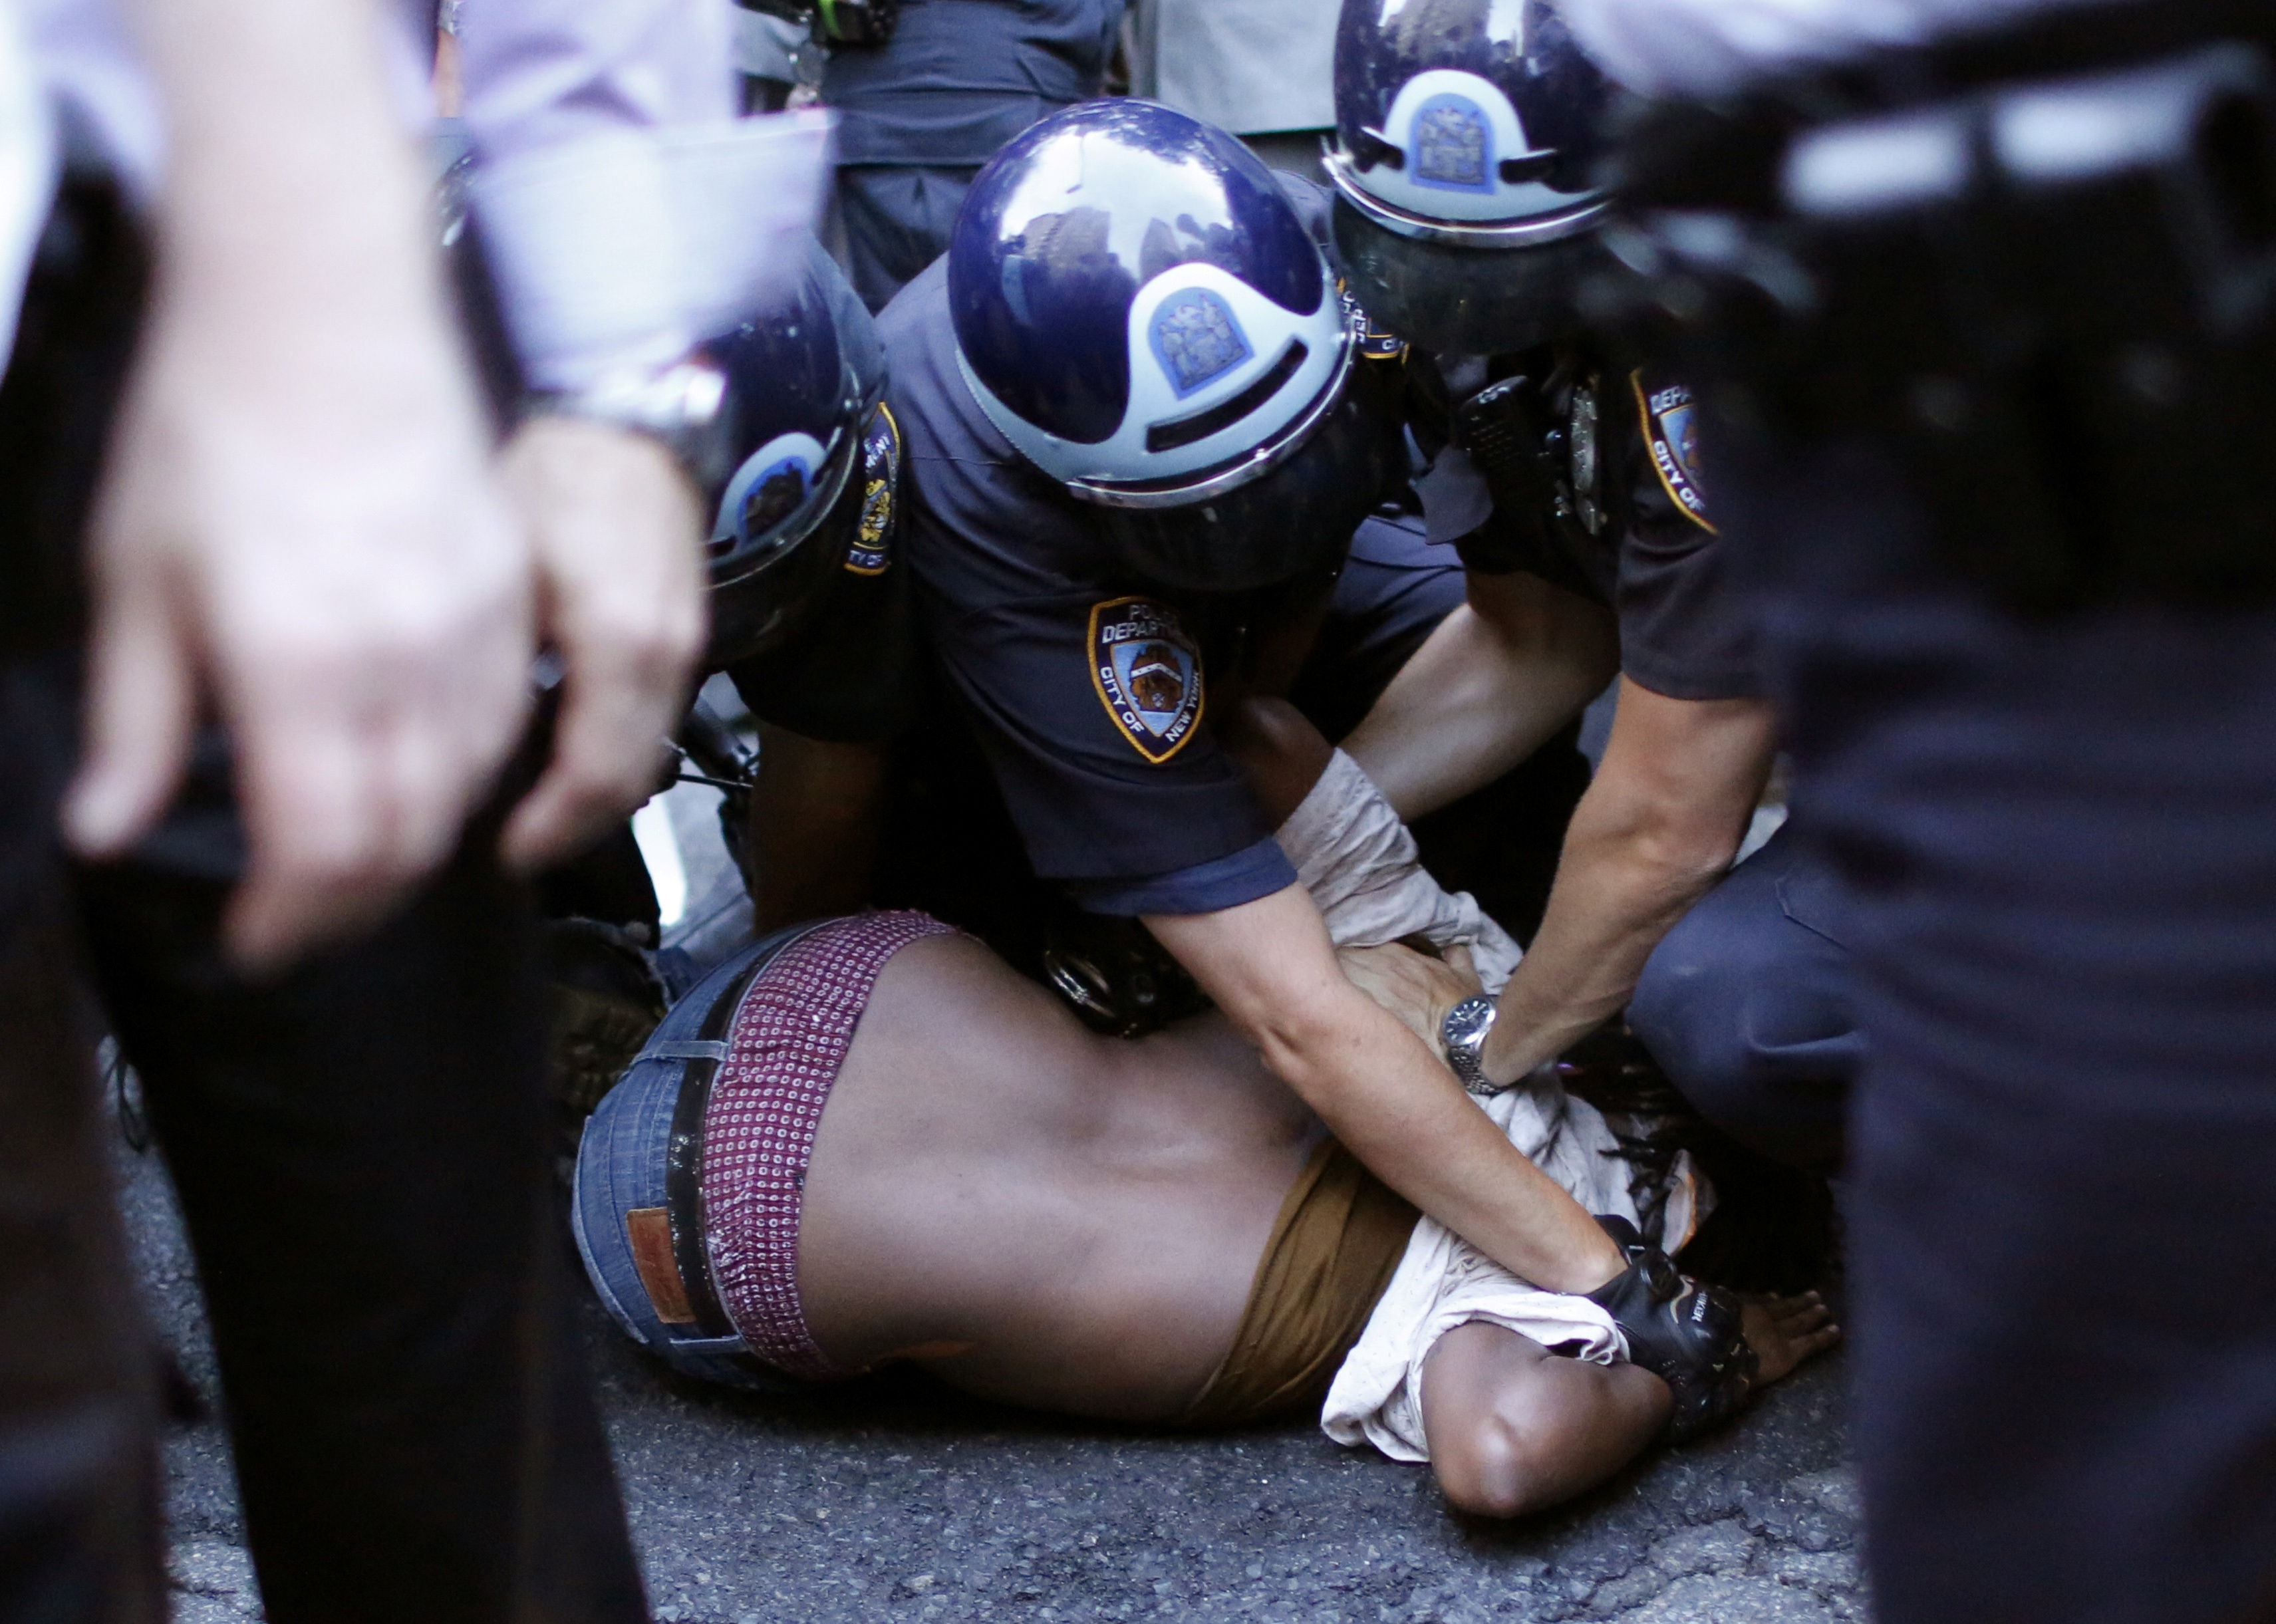 A protestor is detained by NYPD officer as people take part in a protest for the killing of Alton Sterling and Philando Castile during a march along Manhattan's streets in New York July 7, 2016. REUTERS/Eduardo Muoz